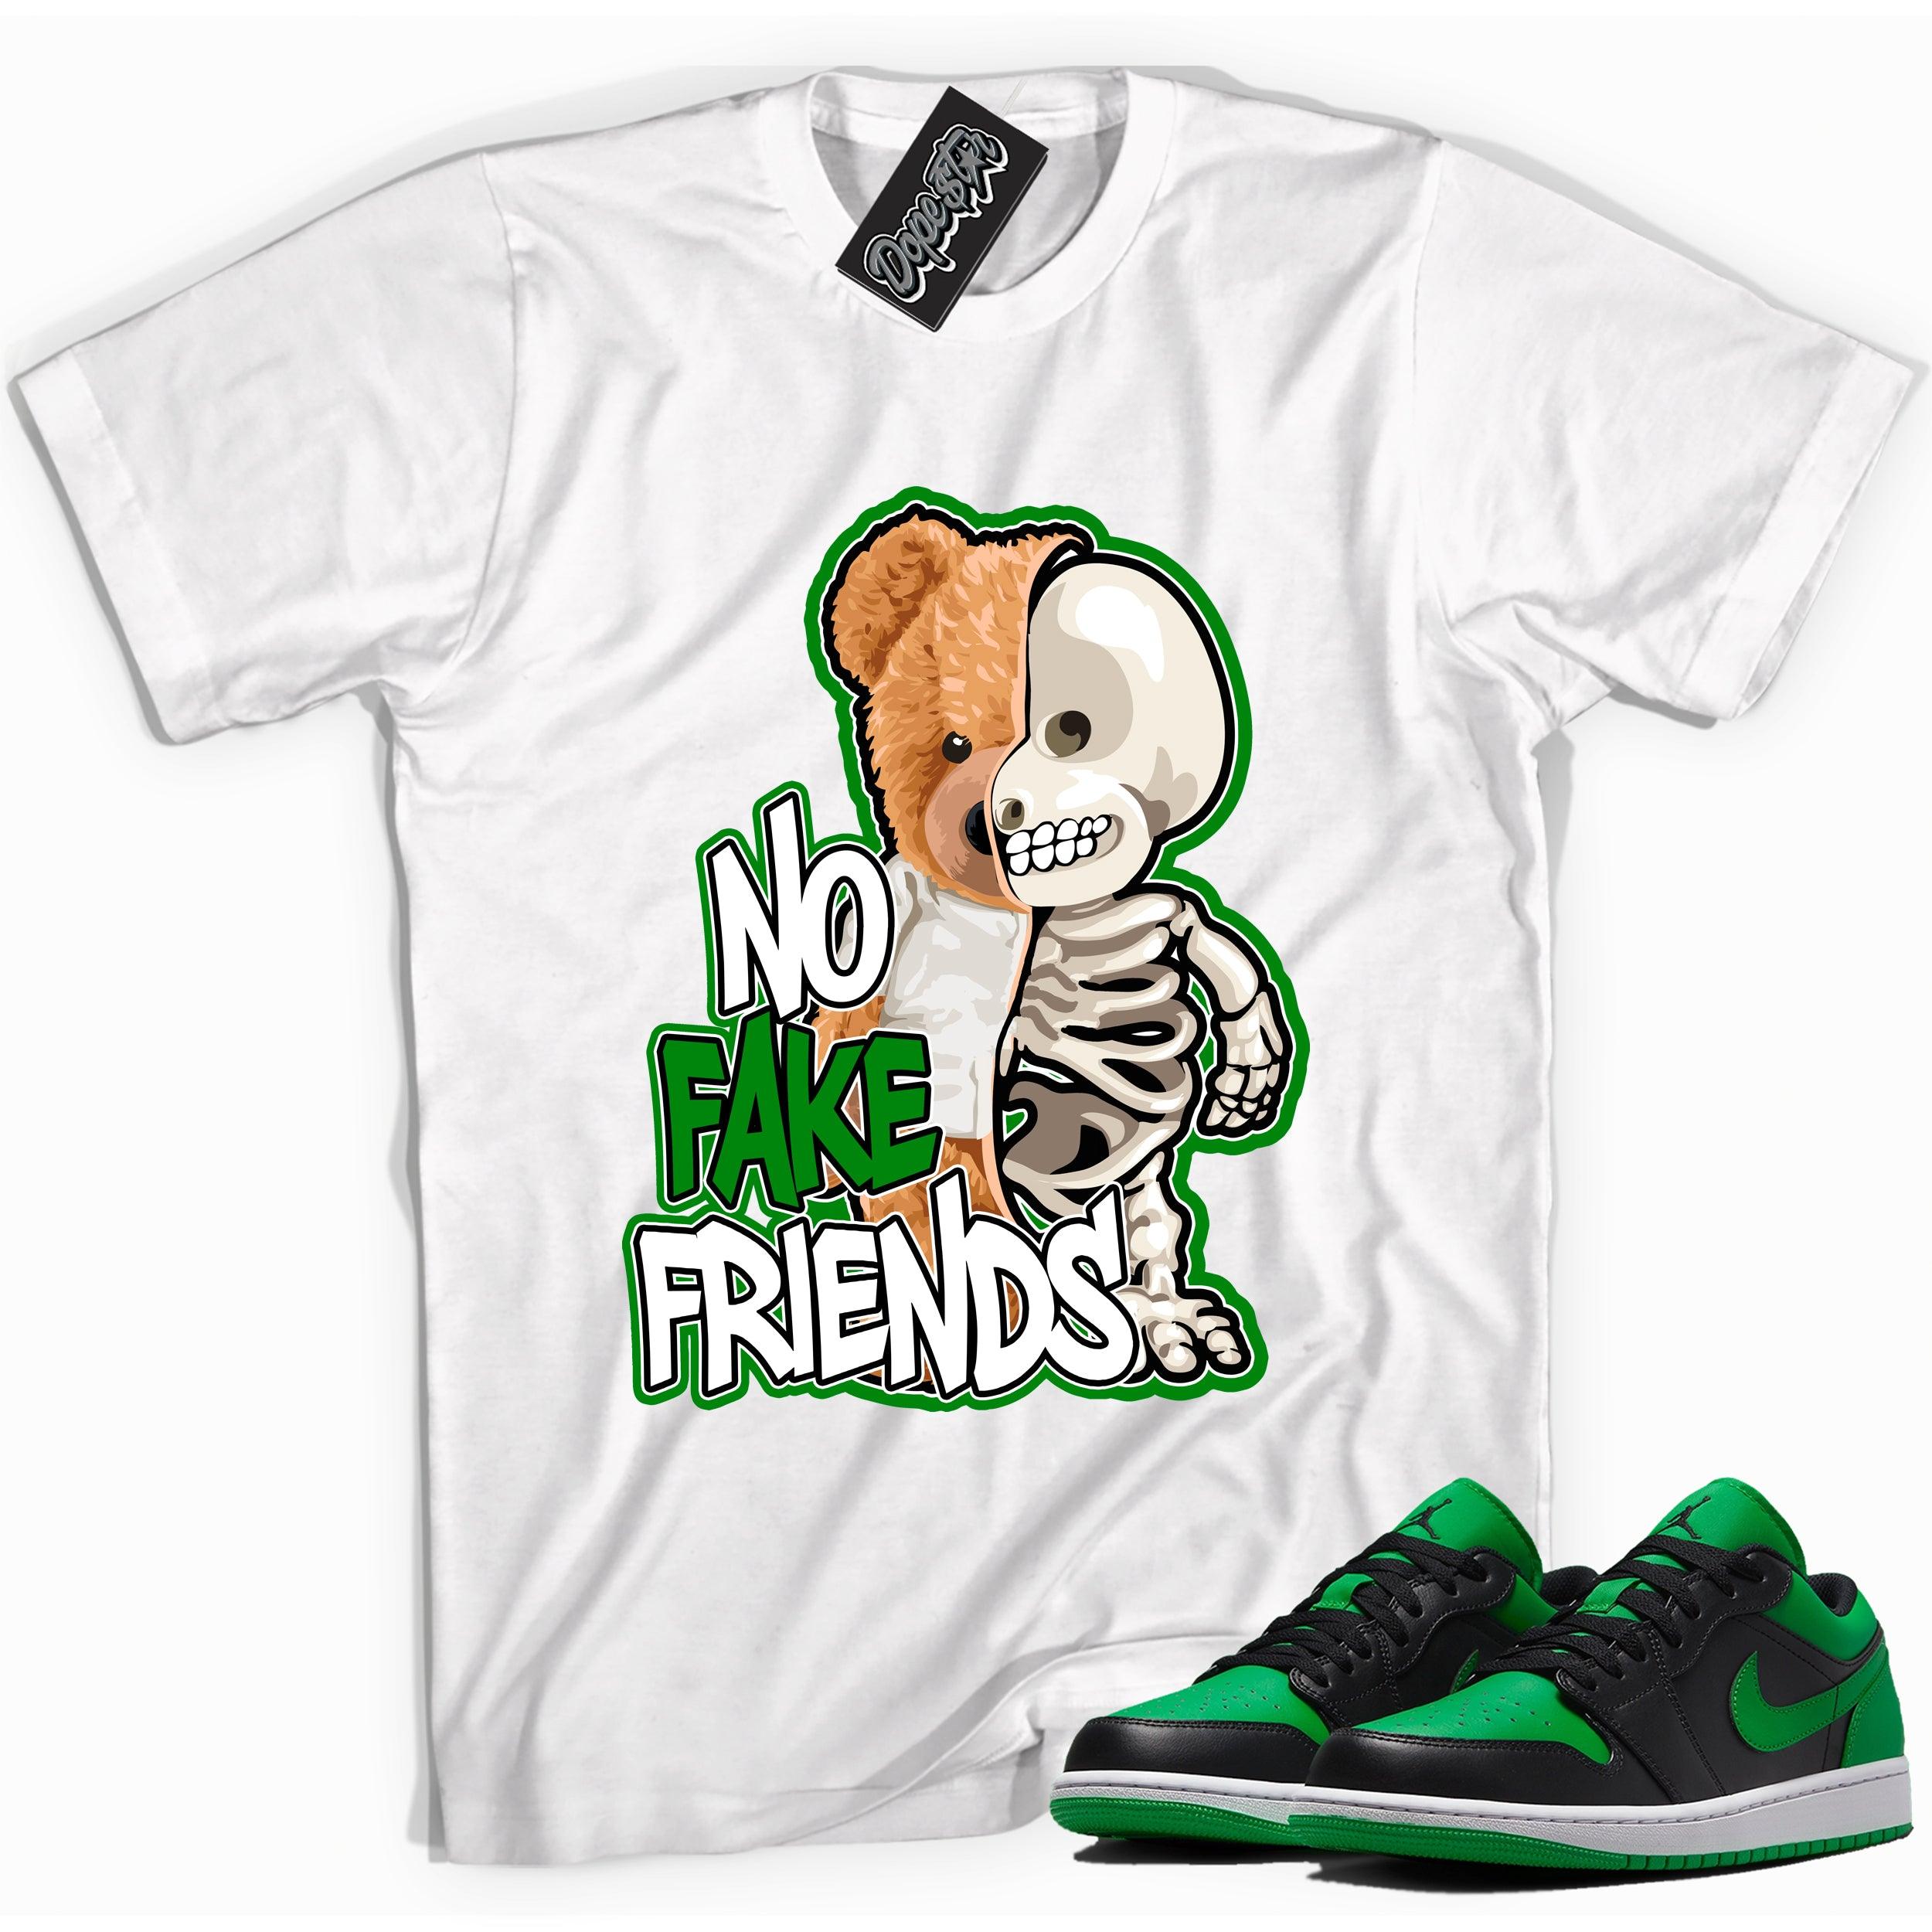 Cool white graphic tee with 'No Fake Friends' print, that perfectly matches Air Jordan 1 Low Lucky Green sneakers